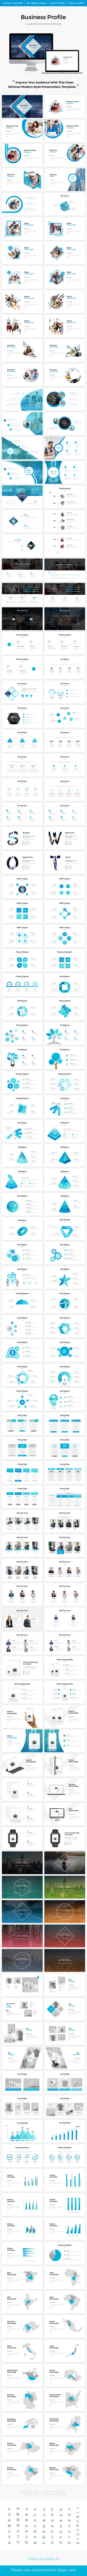 Business Profile PowerPoint Template 2017